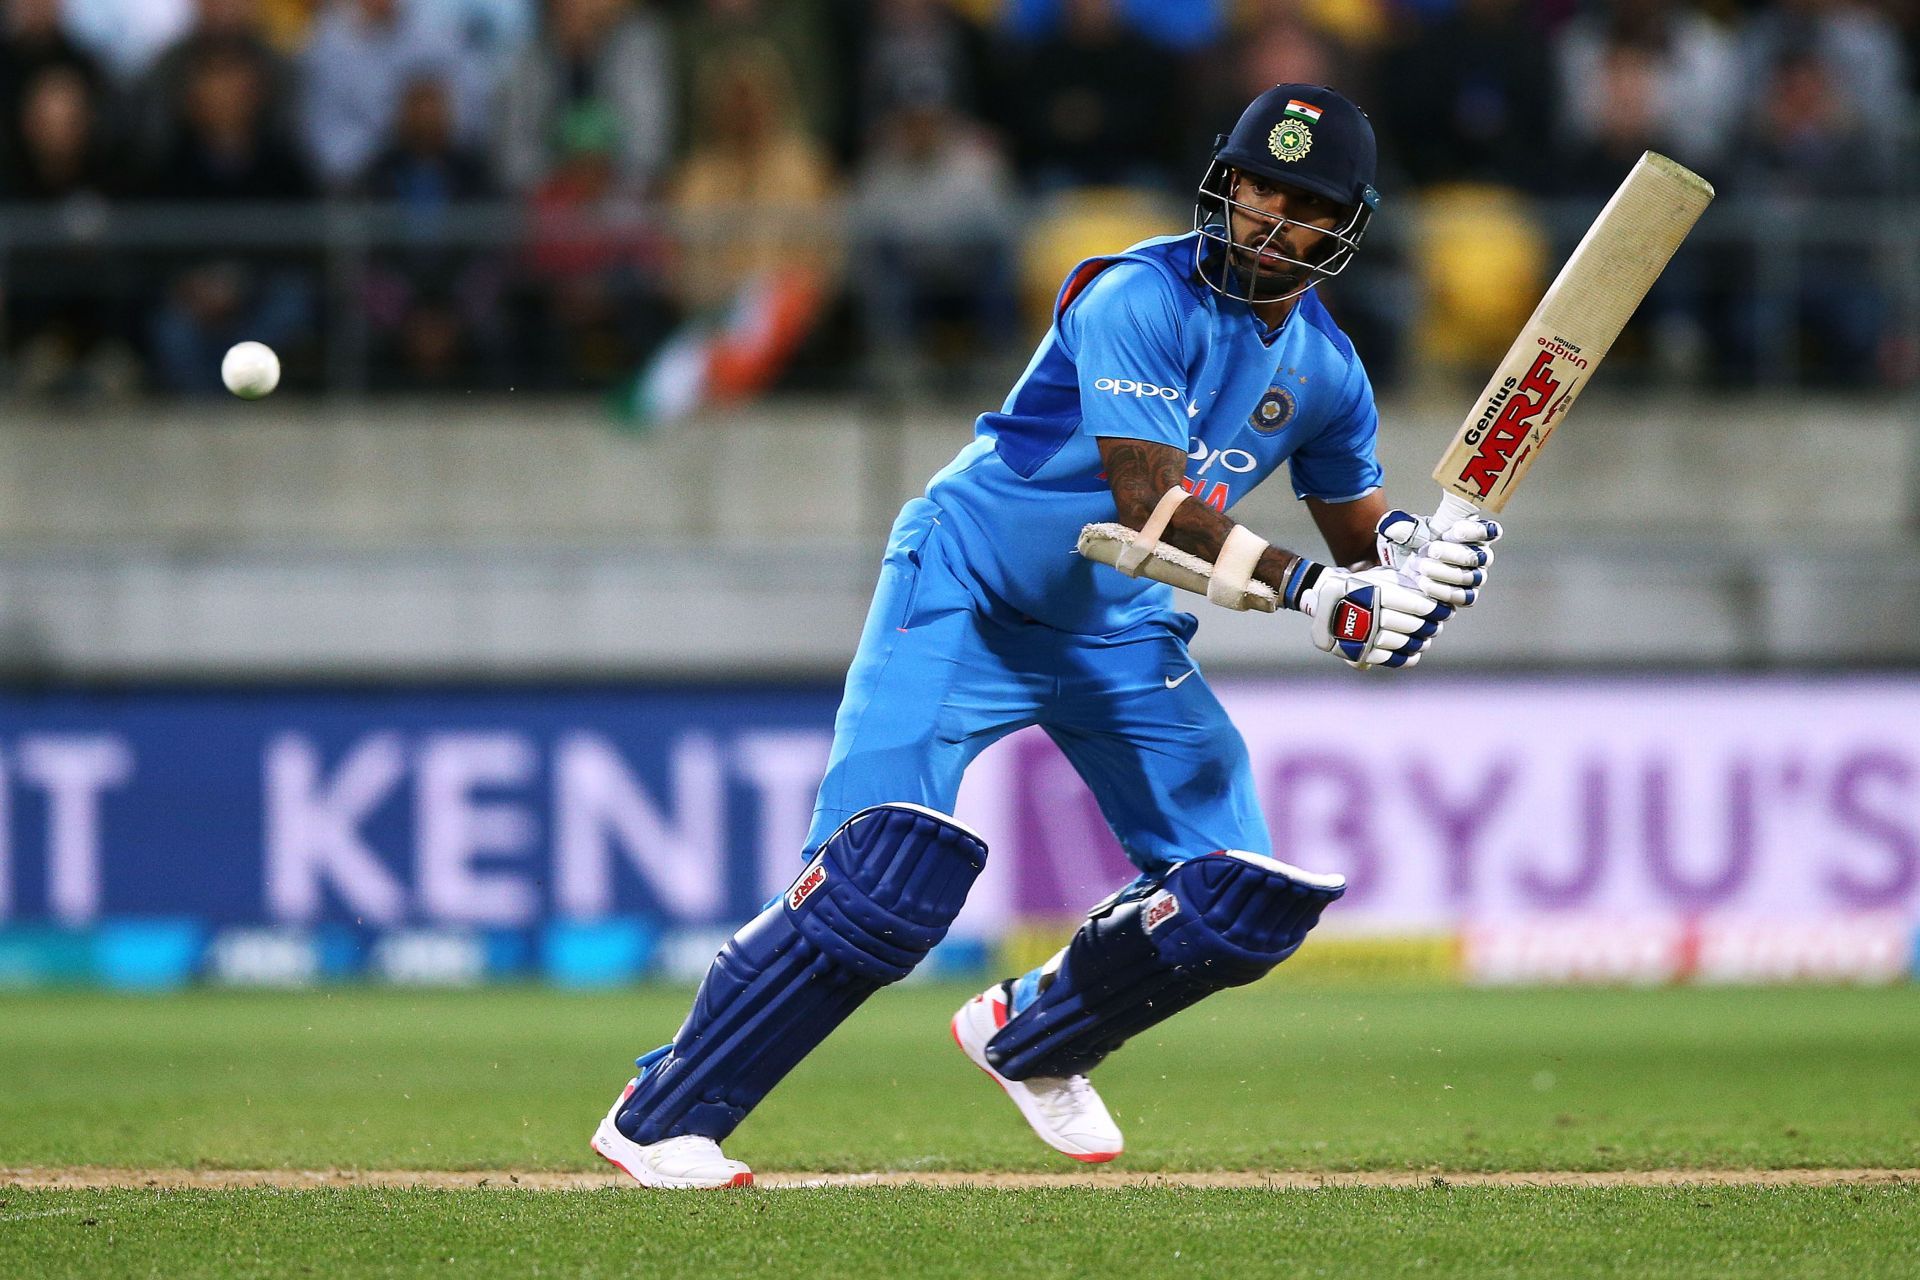 Shikhar Dhawan waltzed his way to a flamboyant 84-ball 79 in the first ODI against South Africa (File Image).